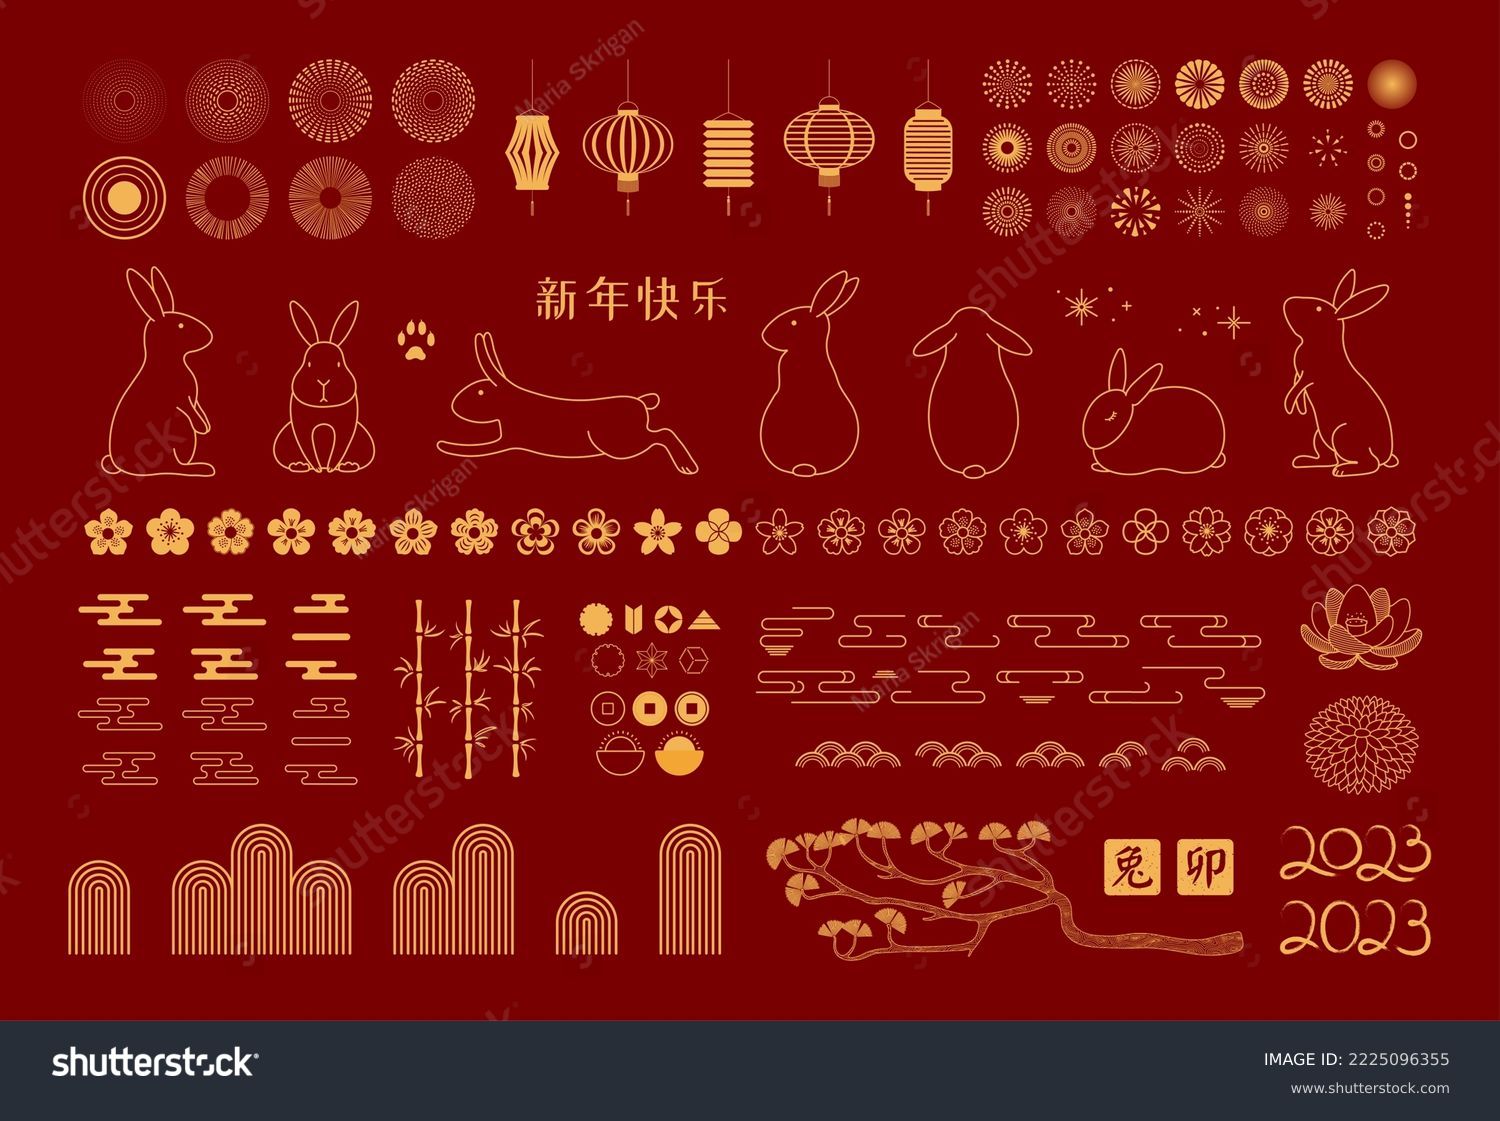 2023 Lunar New Year set, fireworks, abstract elements, flowers, clouds, lanterns, Chinese text Happy New Year, text on stamp Rabbit, gold on red. Line vector illustration. Design concept, CNY clipart #2225096355